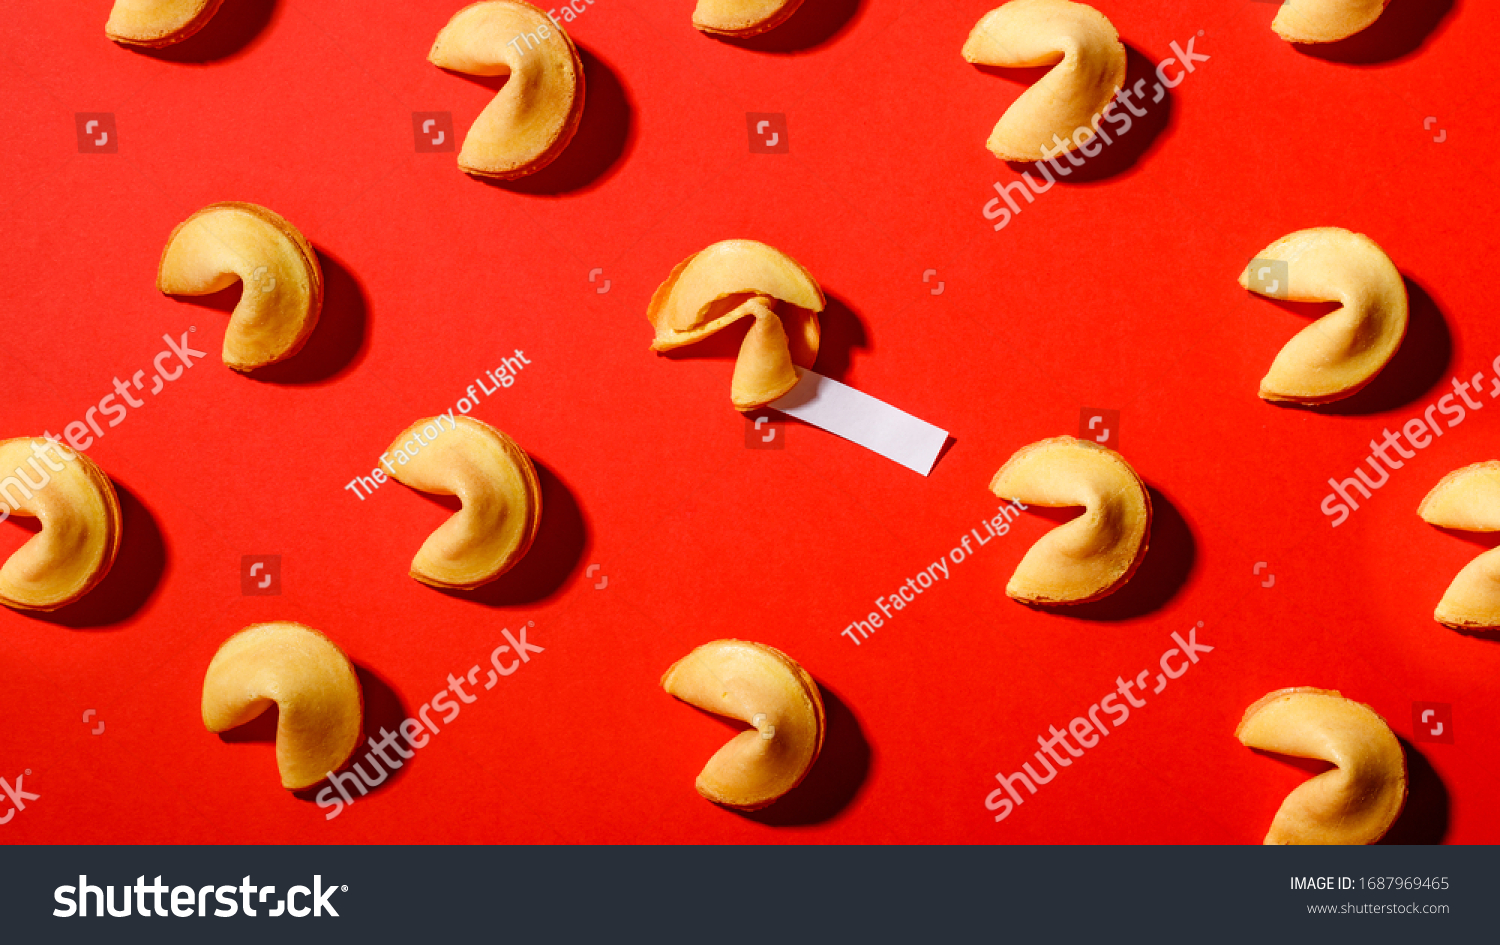 Fortune cookies on a red background, close-up.Сookies with prediction, pattern. #1687969465